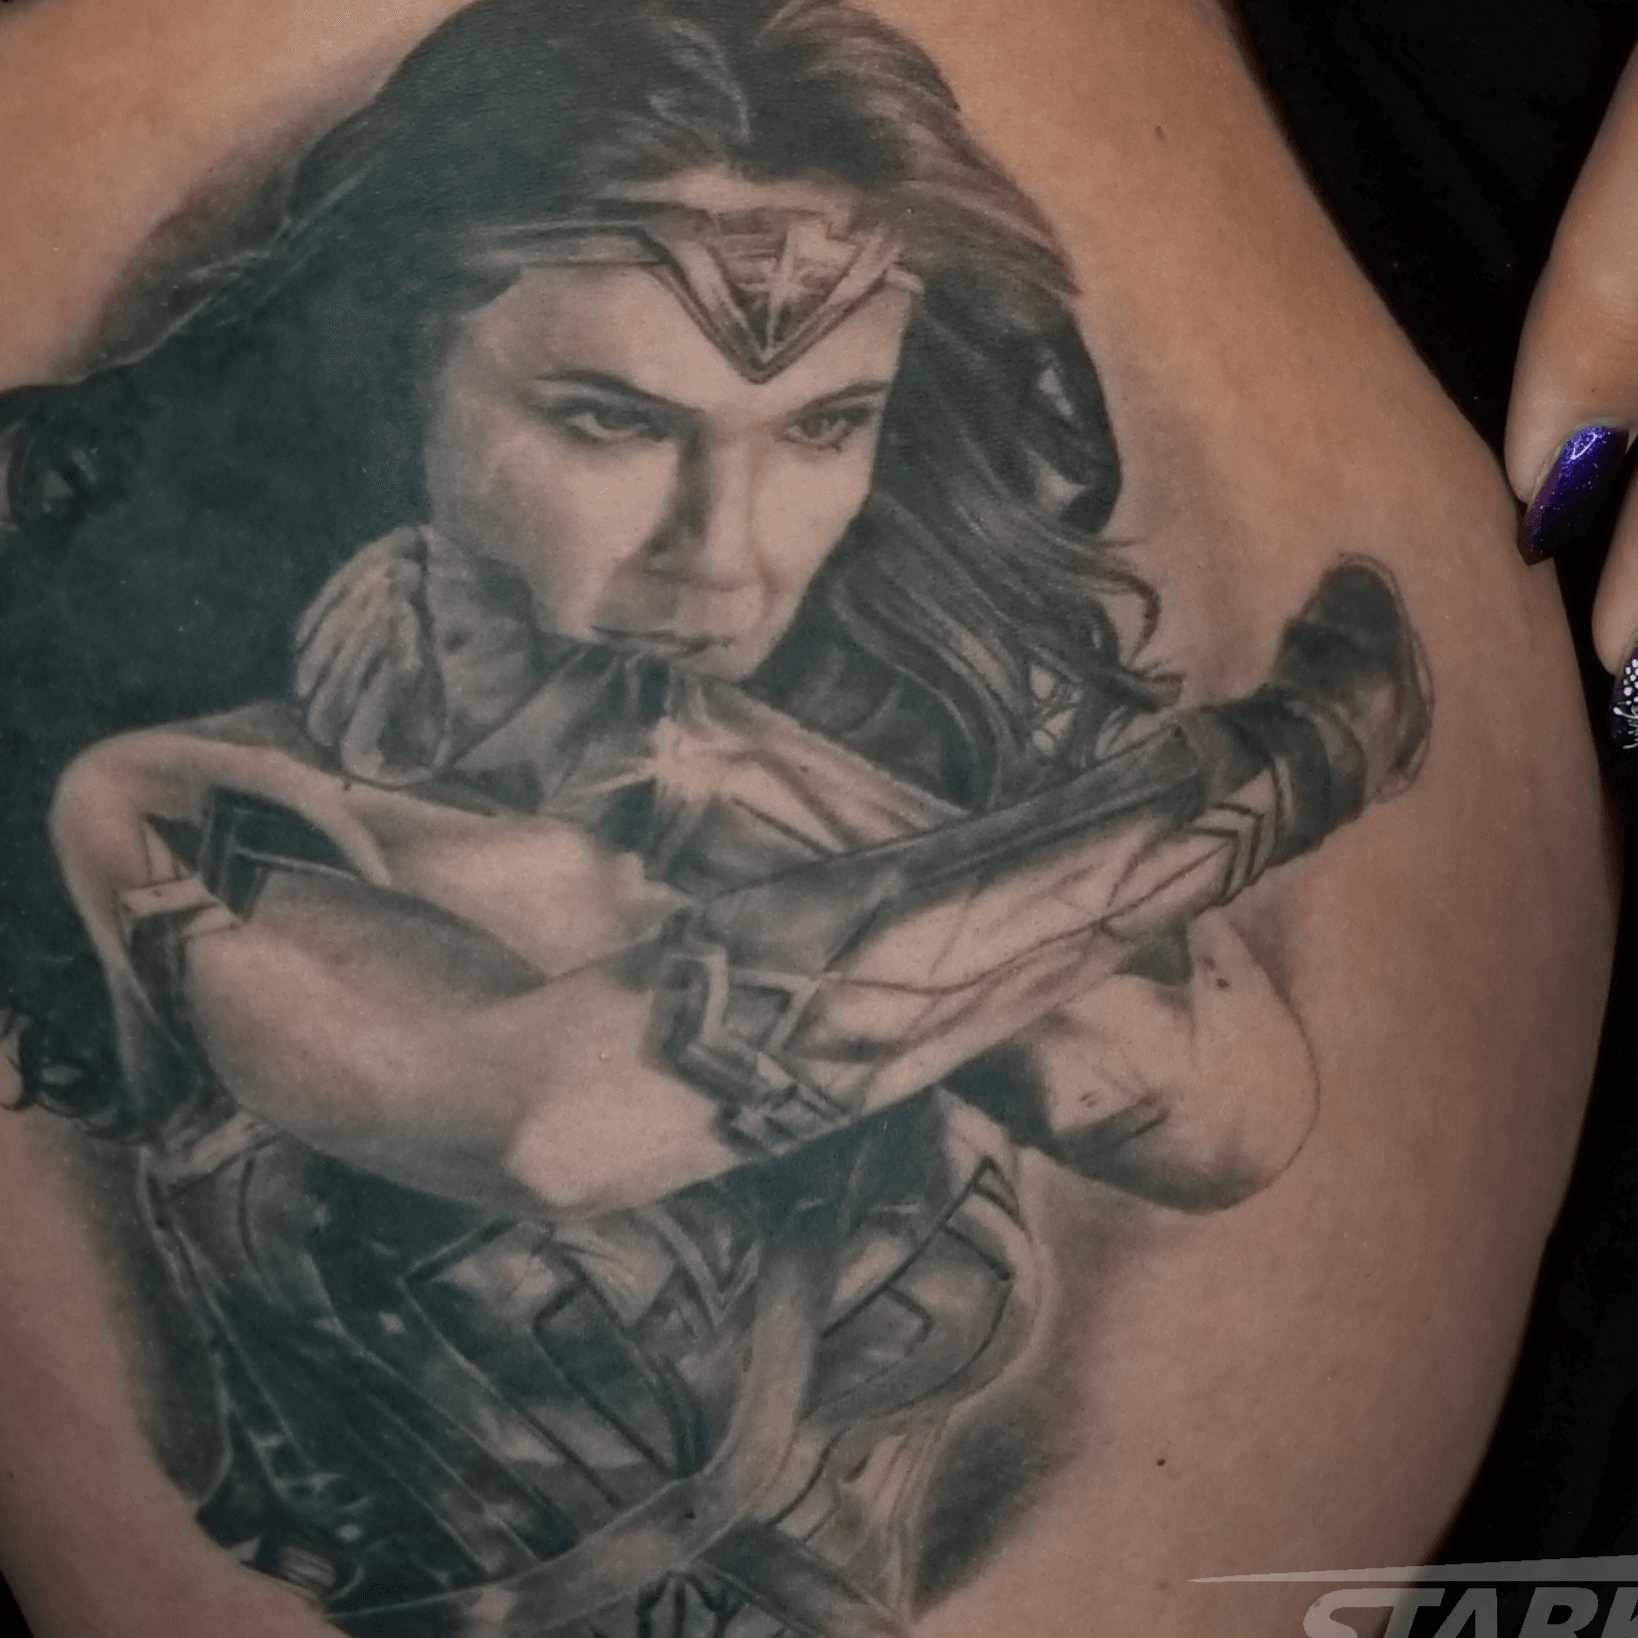 prompthunt creative double exposure effect tattoo design sketch of  beautiful gal gadot faded with beautiful mountain scenery realism tattoo  in the style of matteo pasqualin amazing detail sharp